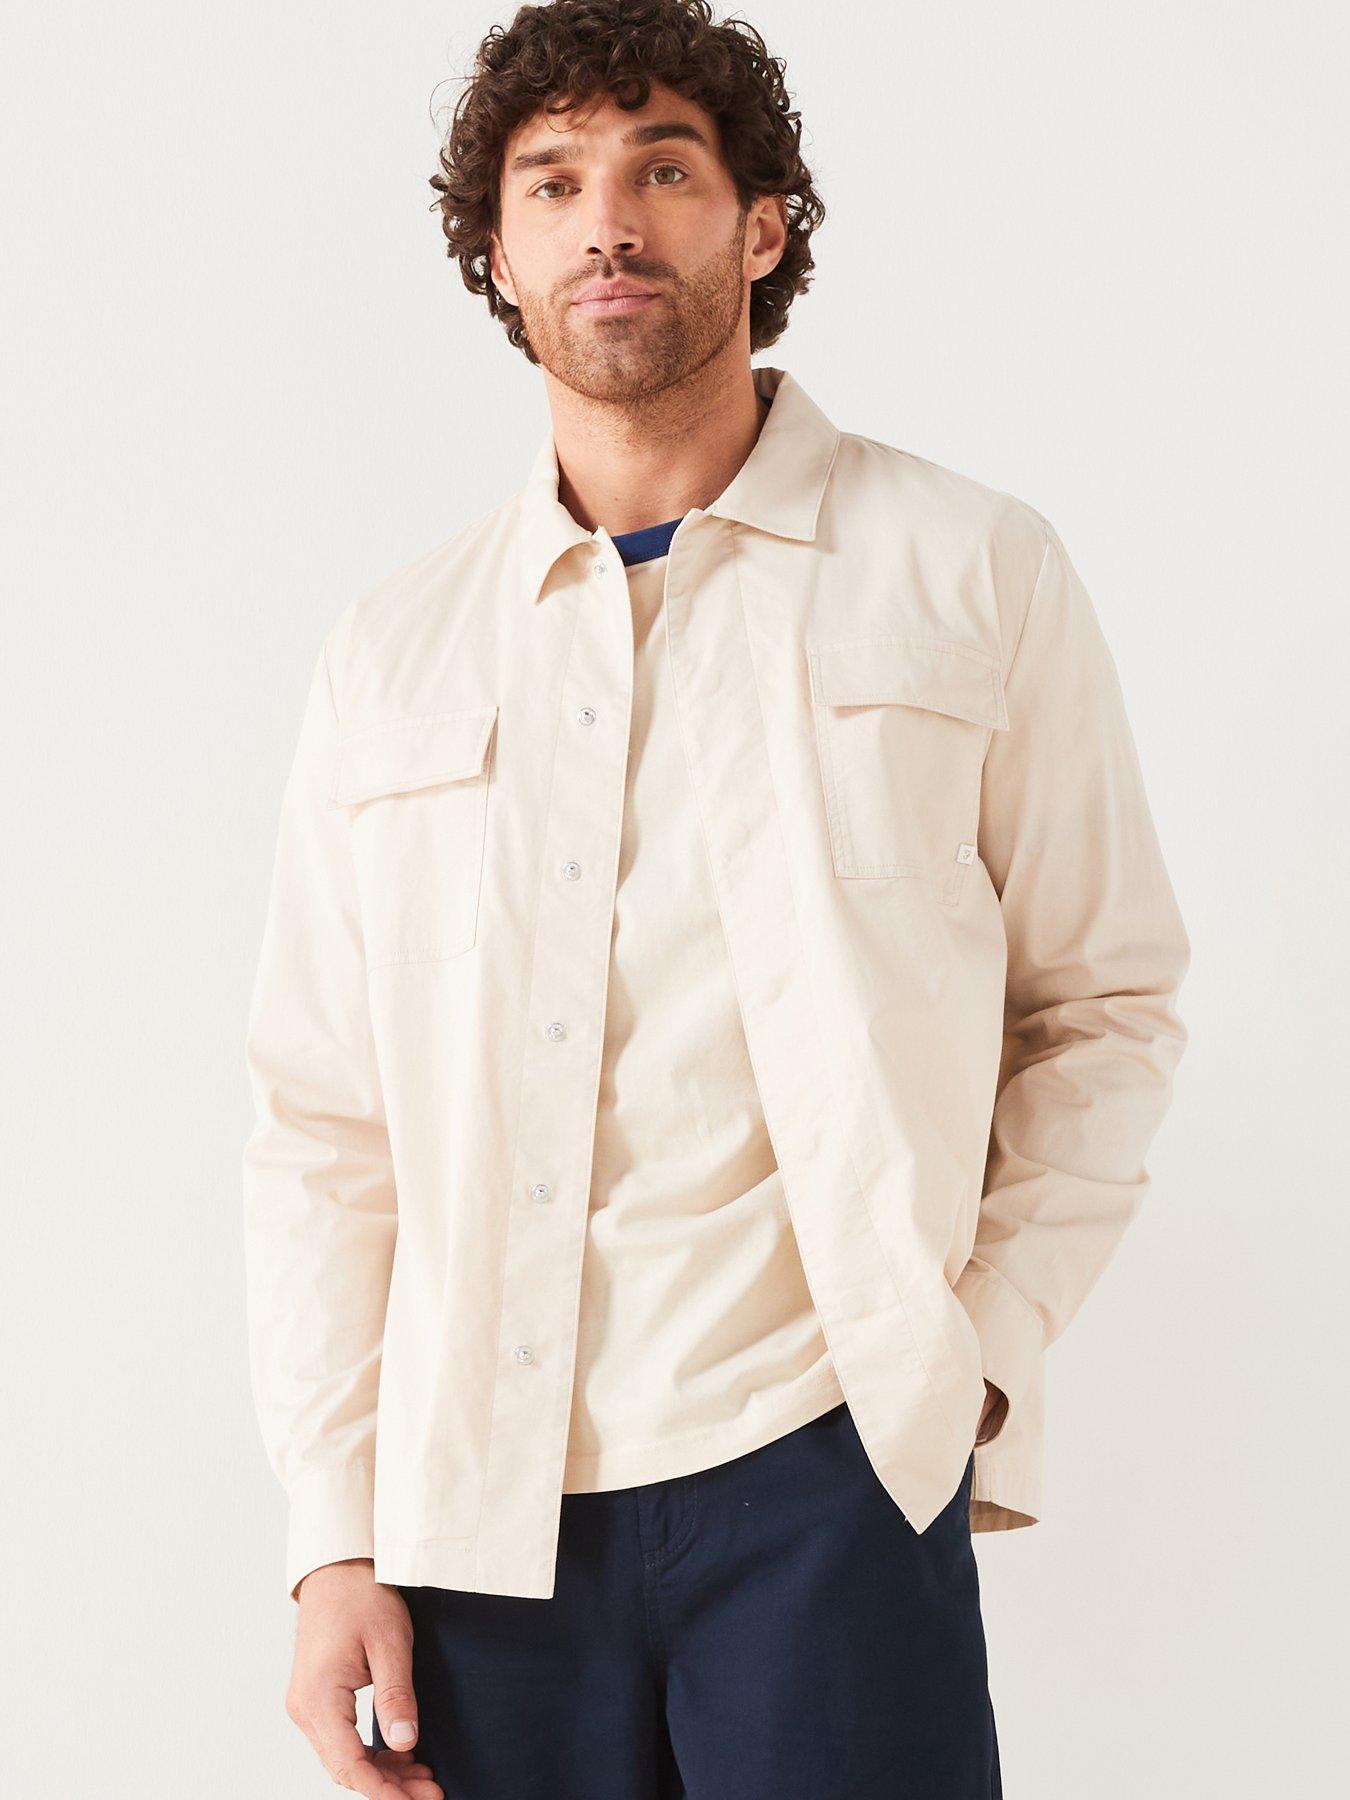 Vdot Jeans Jackets Shirts - Buy Vdot Jeans Jackets Shirts online in India